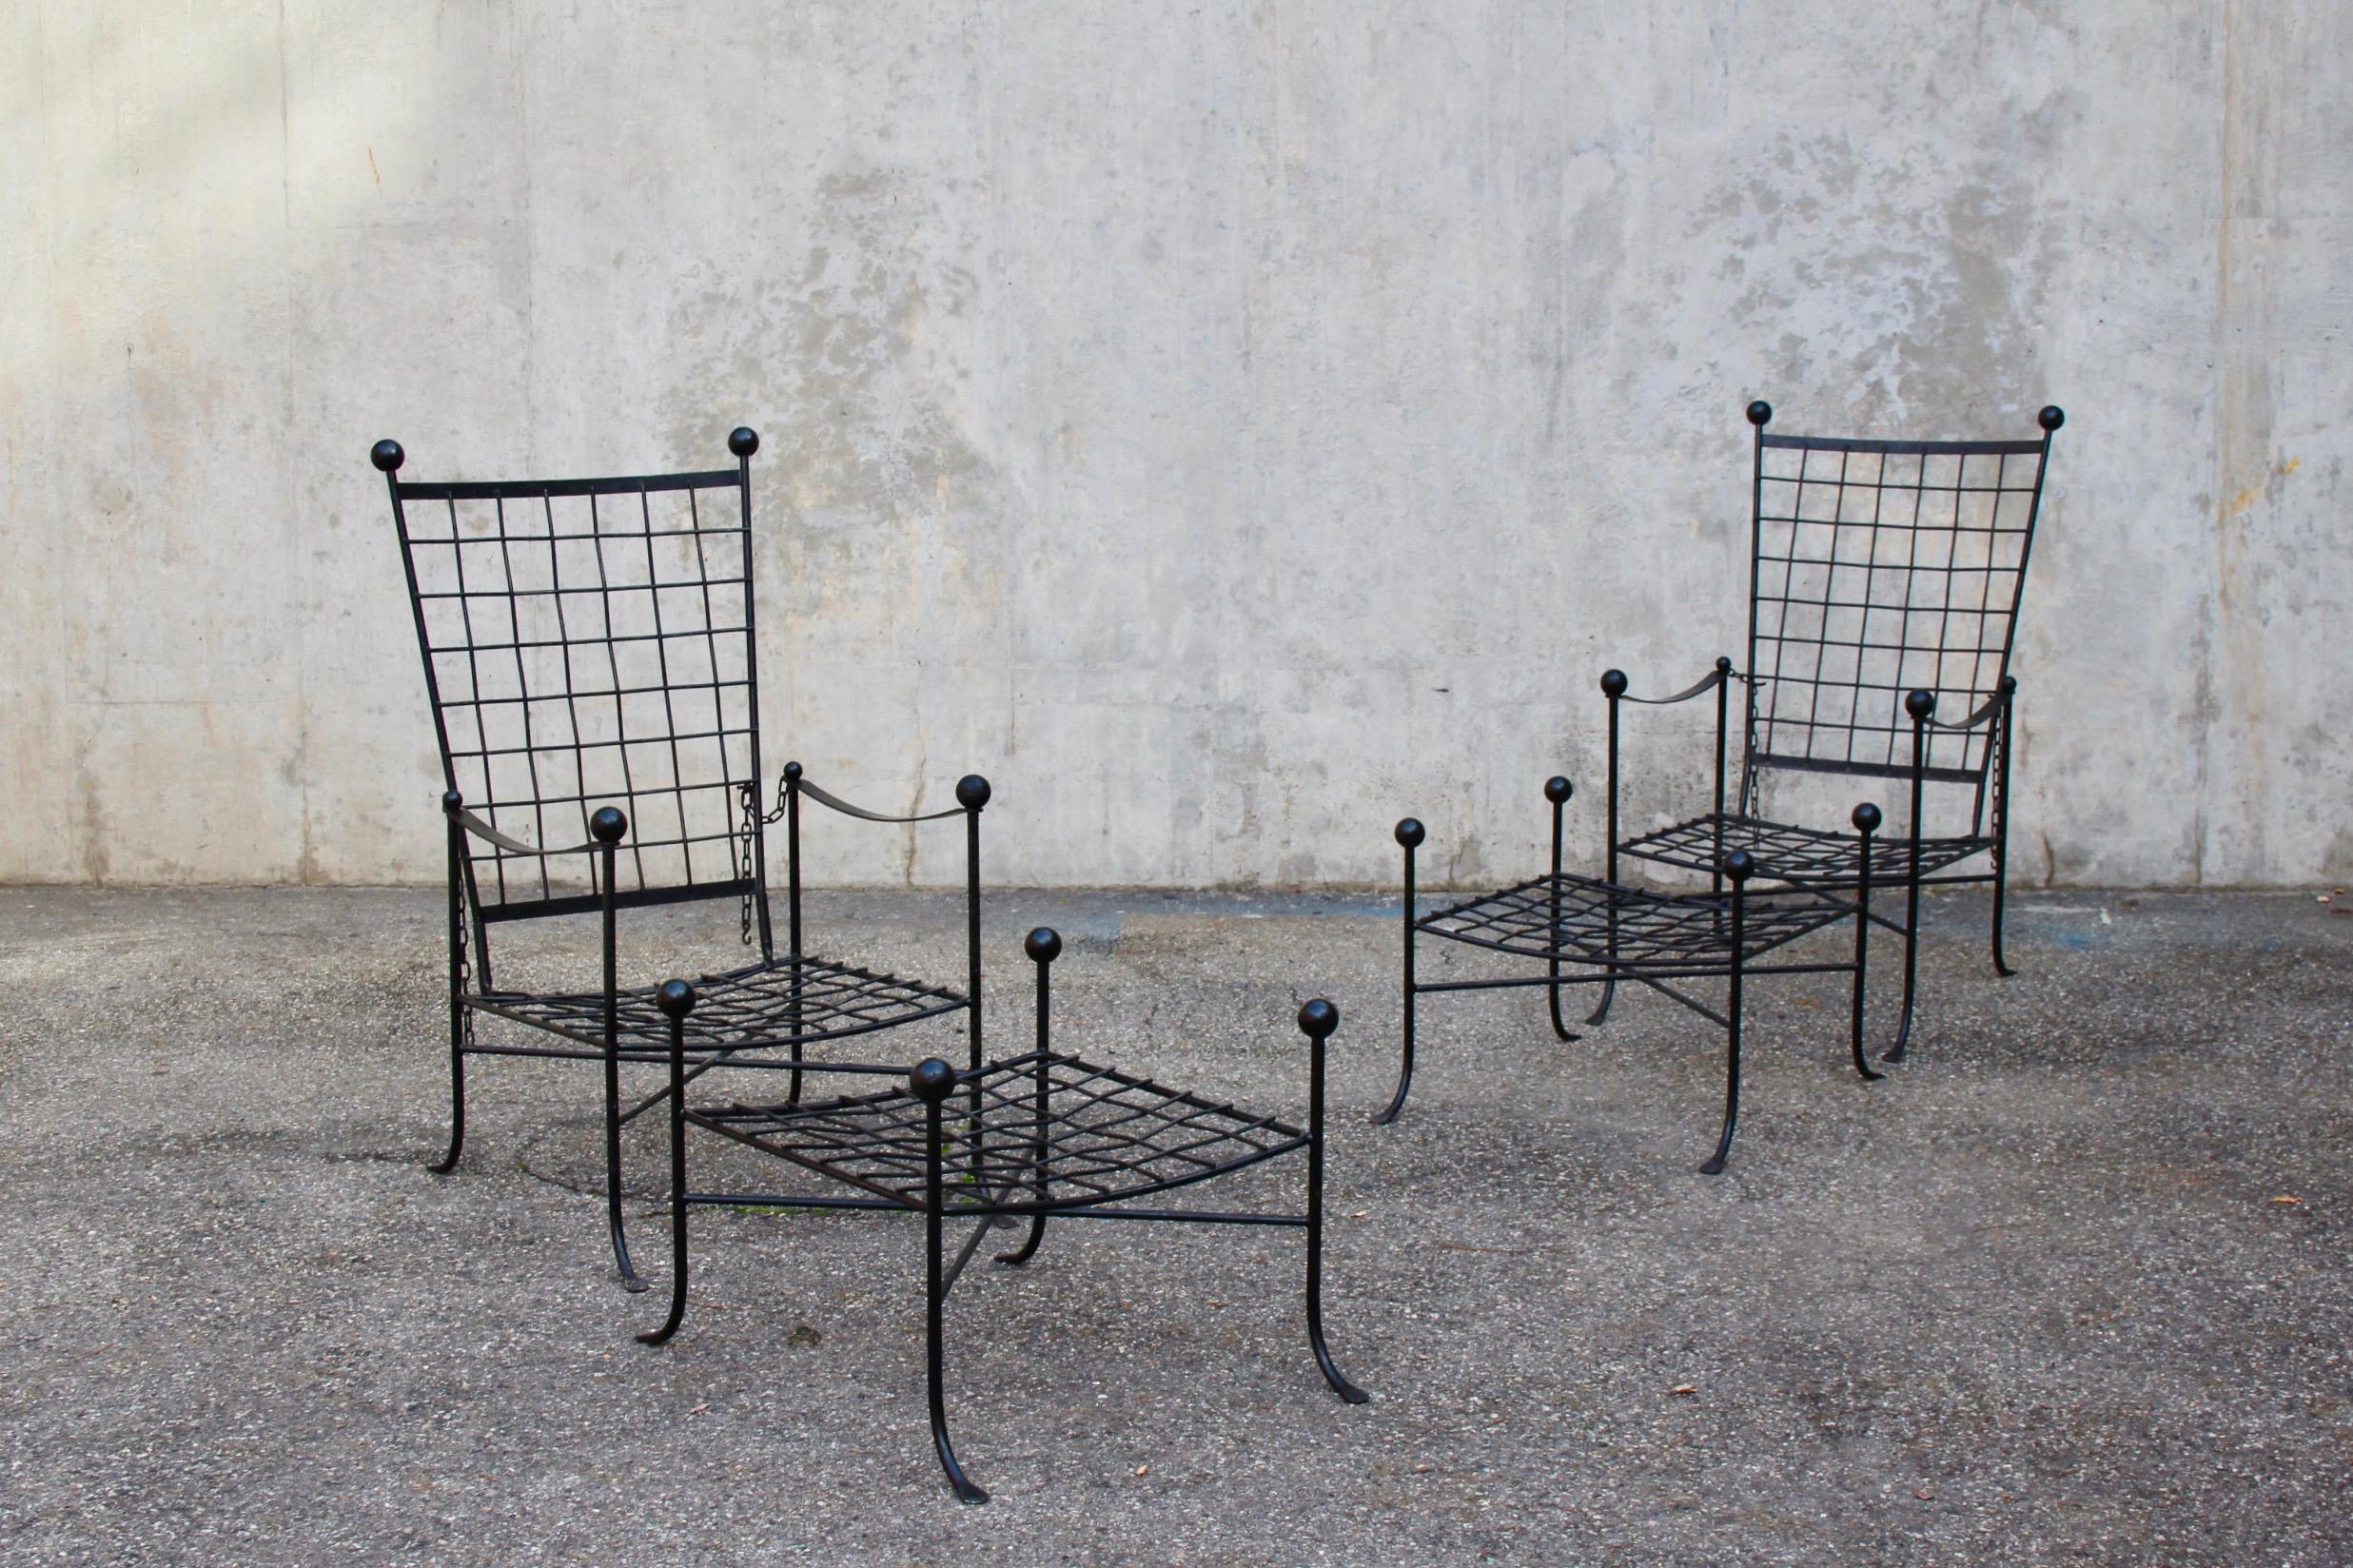 Pair of Mario Papperzini attributed garden lounge chairs with ottoman black painted metal, Swiss riviera provenance.